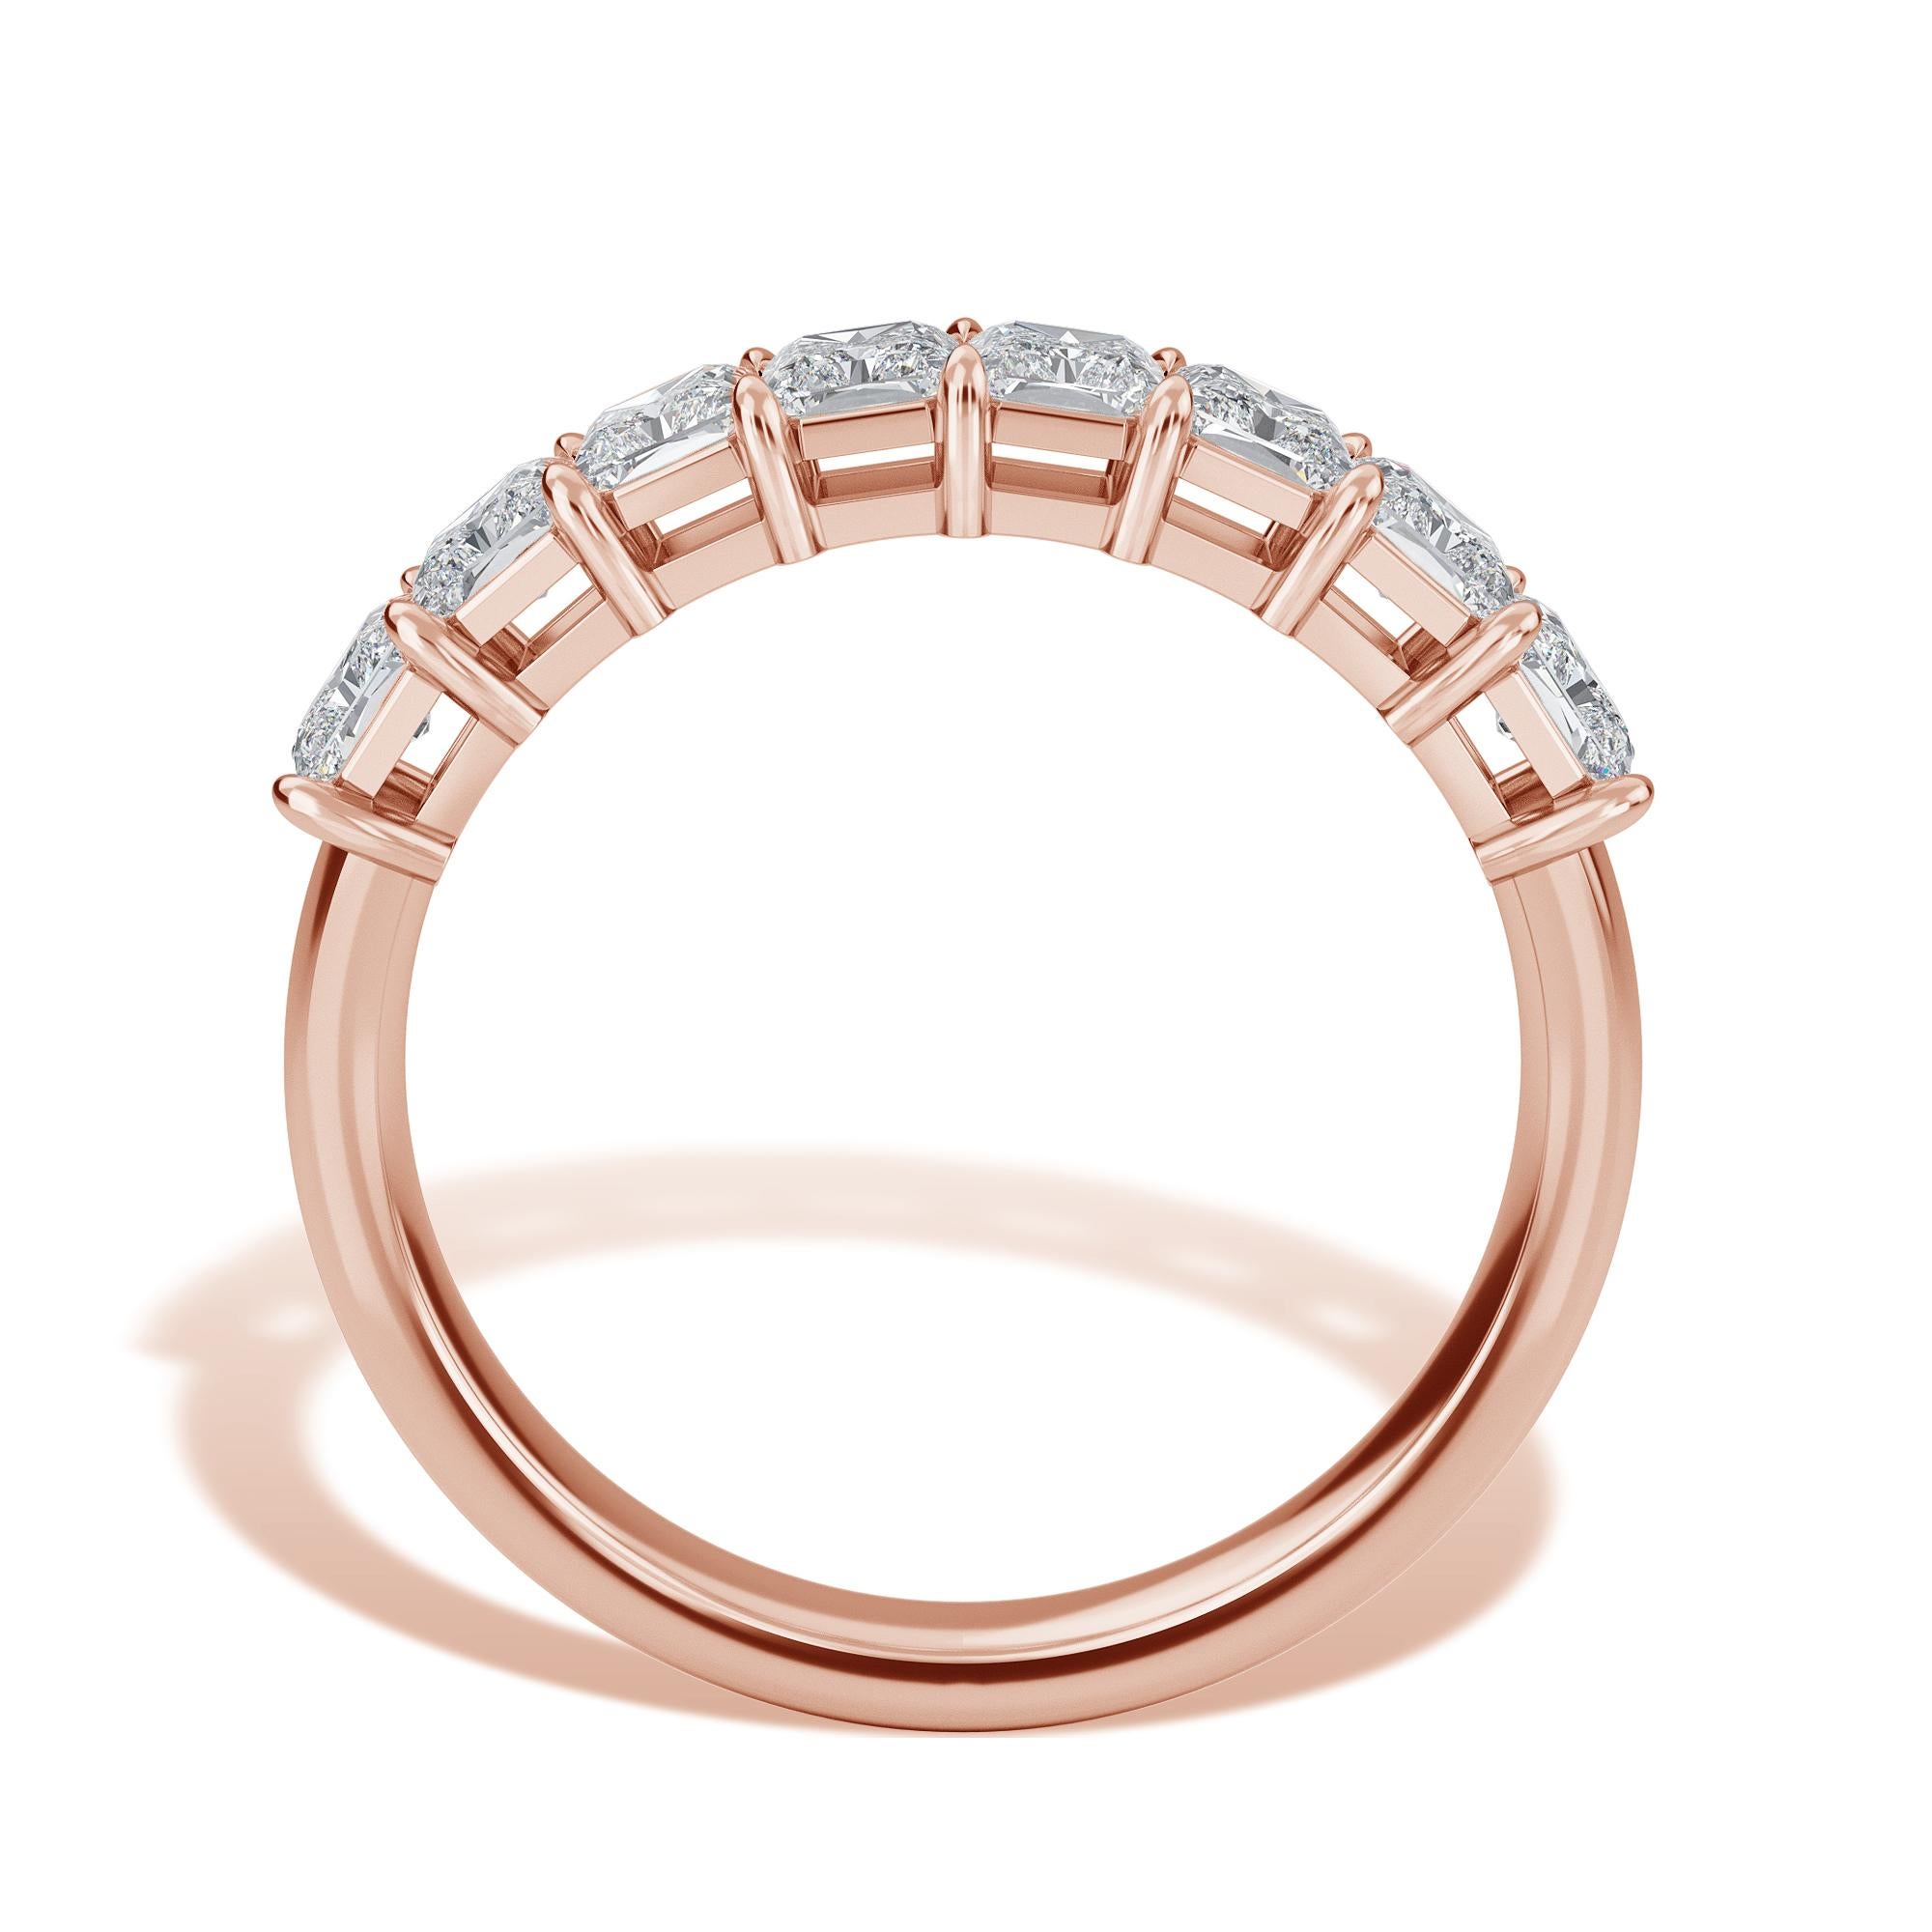 This Rose Gold features 8 Radiant Diamonds, with a total carat weight of 1.56. The diamonds are F Color, VS Clarity, set in 18K Rose Gold in a finger size 6.5.

Message us for additional finger size information. 